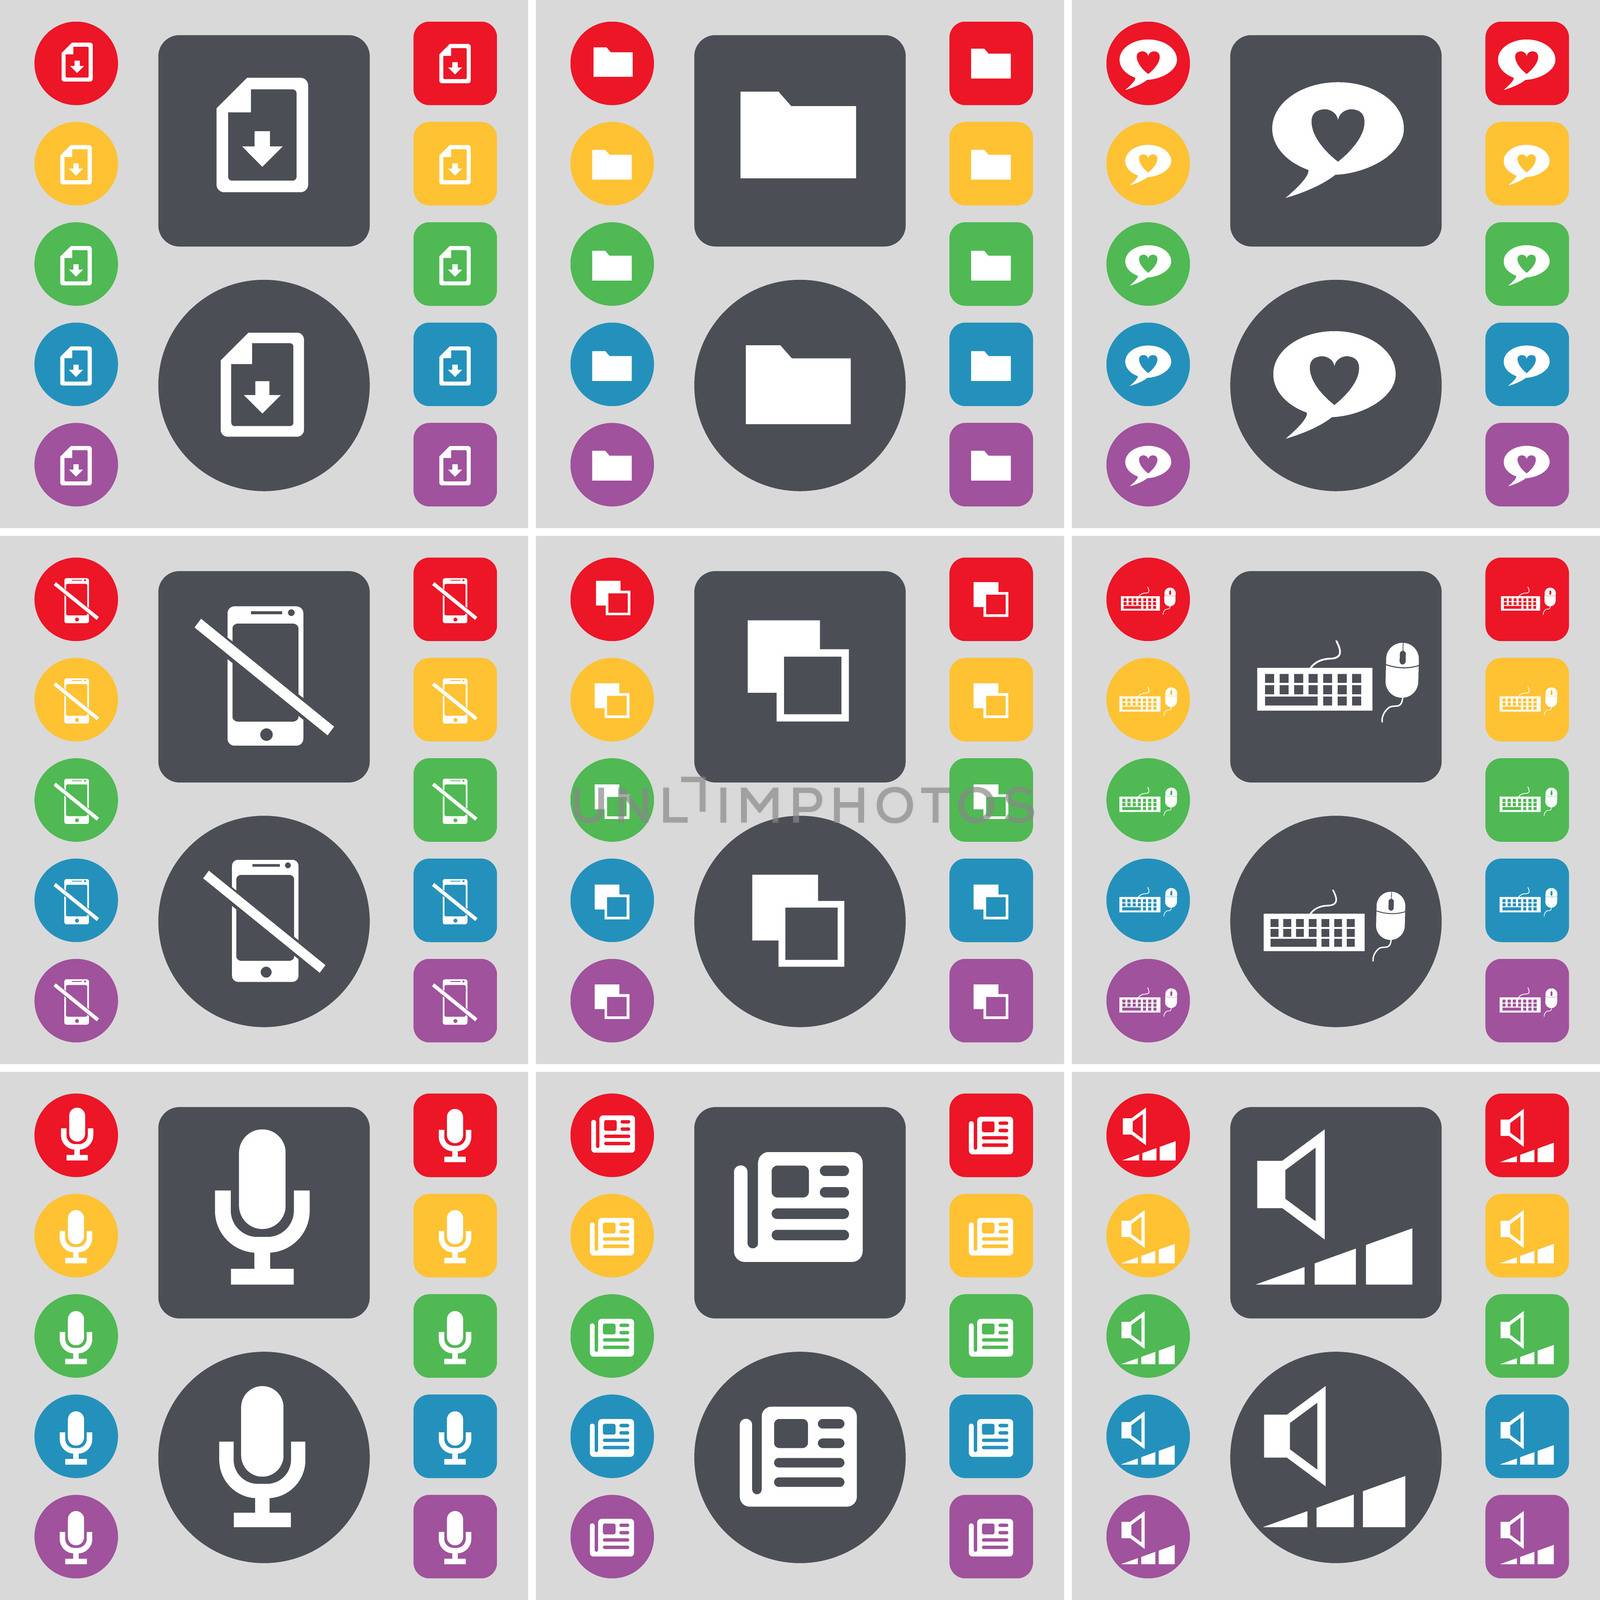 Download file, Folder, Chat bubble, Smartphone, Copy, Keyboard, Microphone, Newspaper, Volume icon symbol. A large set of flat, colored buttons for your design.  by serhii_lohvyniuk